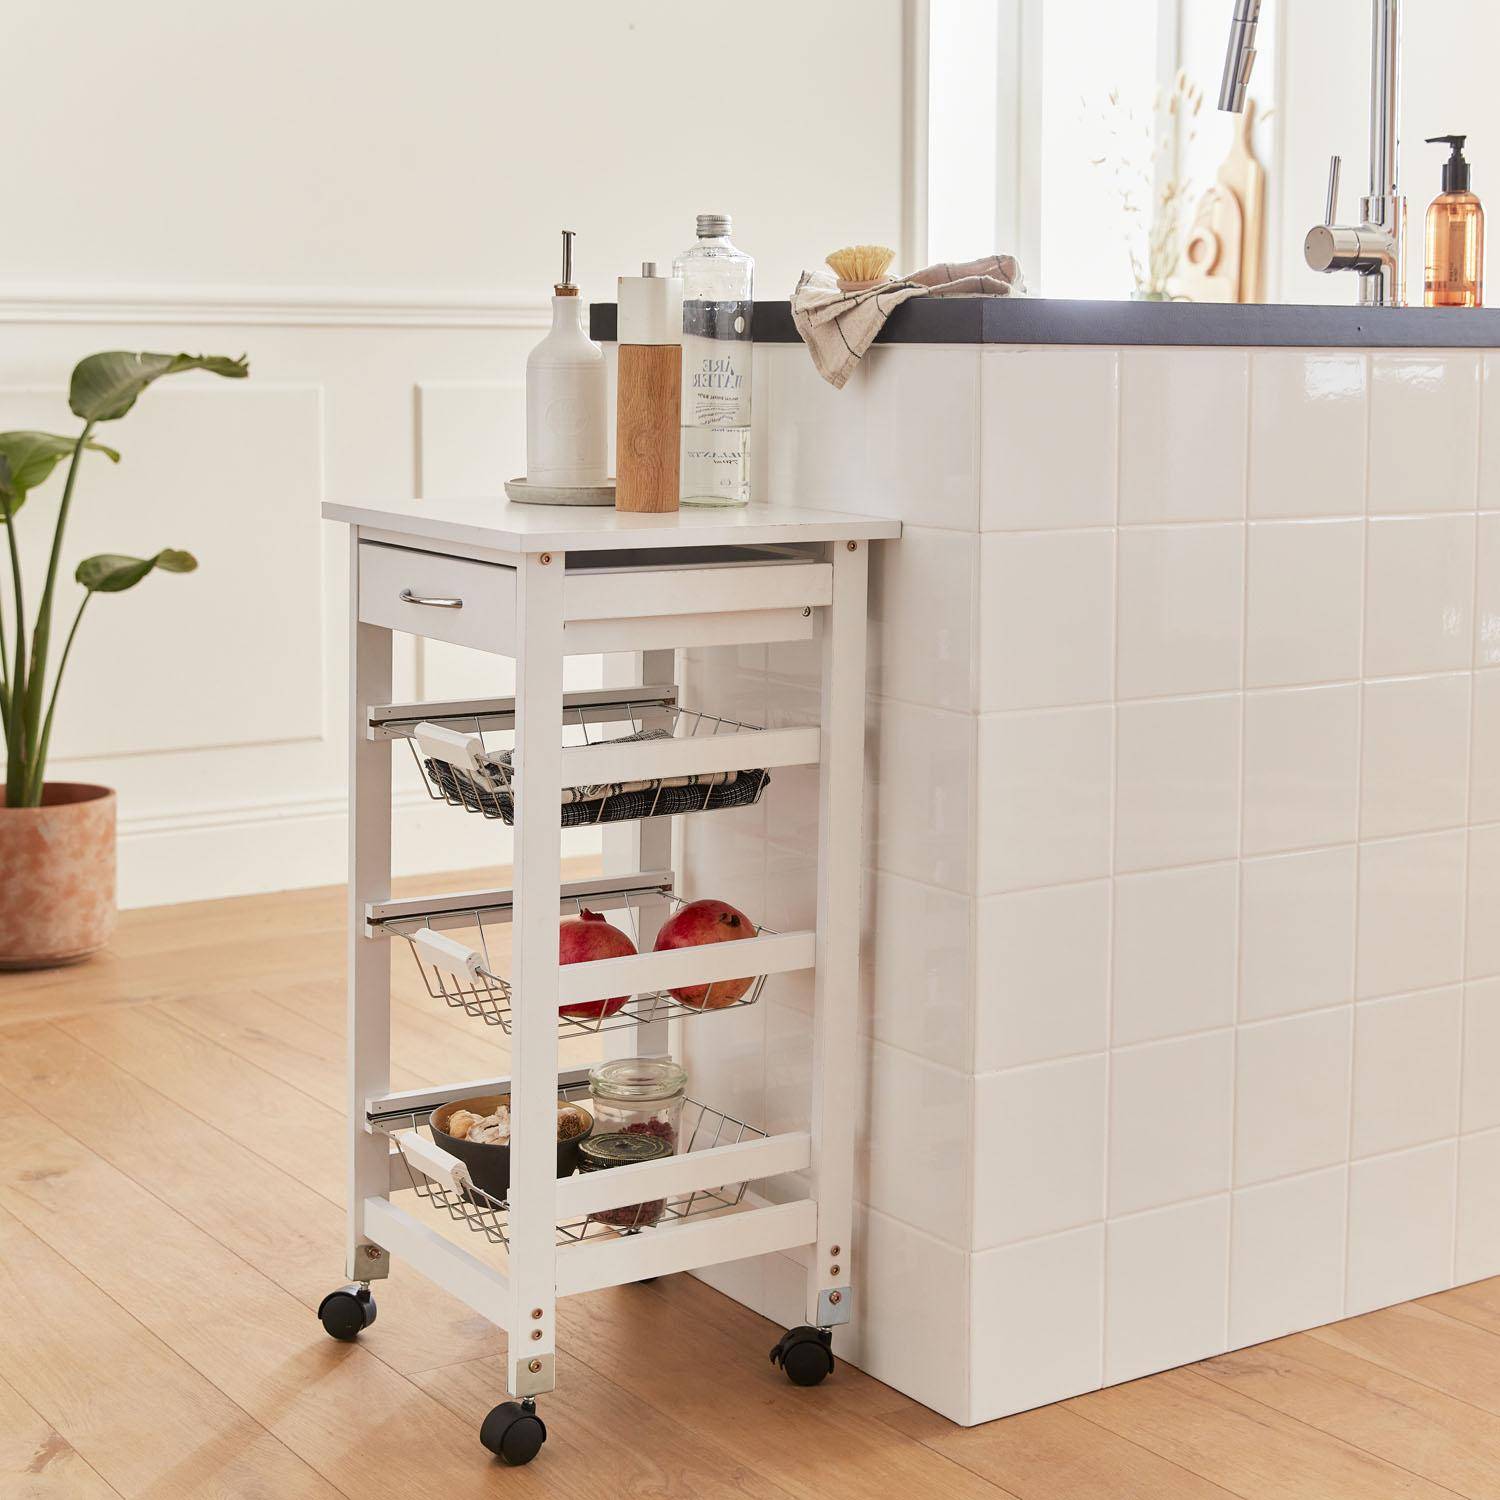 Wood-Effect Kitchen Cart with Wheels - 37x37cm, white Photo2